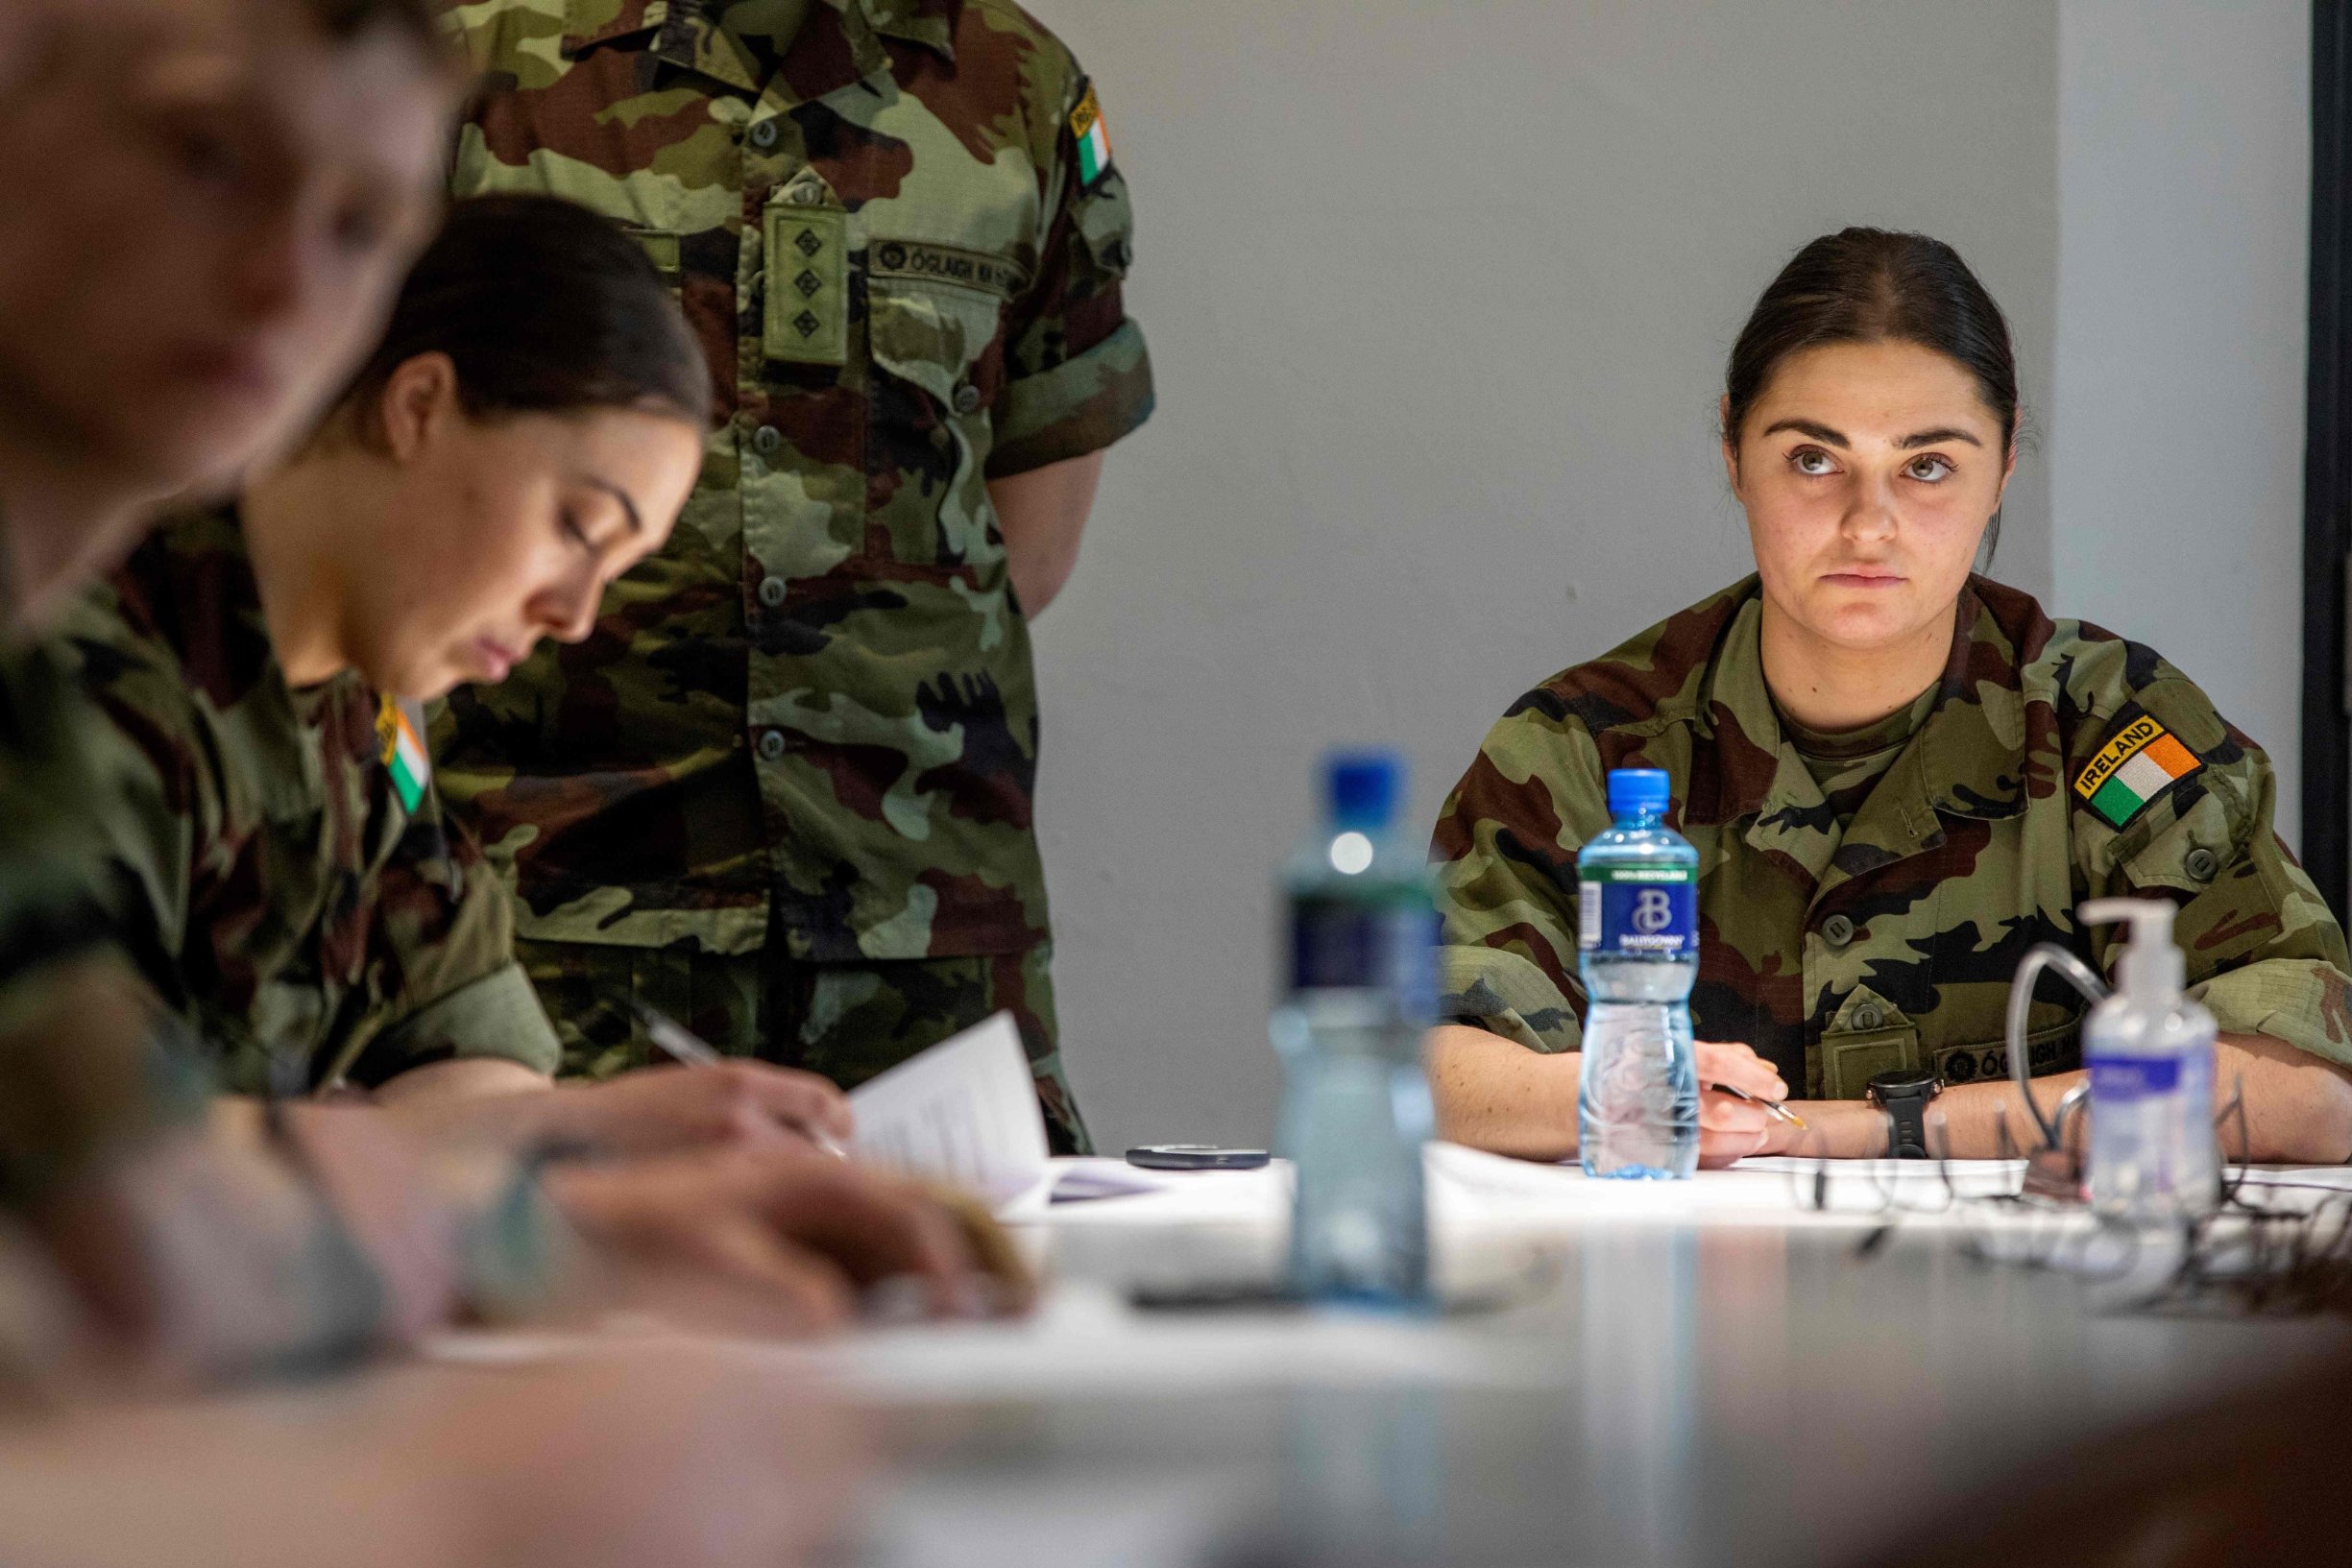 Irish Army cadets, who are being trained to assist with the staffing of a call cente handling contact tracing for coronavirus patients, are trained at Dr Steevens' Hospital in Dublin City centre, on March 13, 2020, as schools and universities closed on Thursday for two weeks with mass gatherings banned and social distancing strongly recommended. - The Republic has had 70 confirmed cases and one death from the COVID-19, well behind neighbouring Britain as well as Italy -- the hardest hit nation in Europe with more than a thousand deaths. (Photo by PAUL FAITH / AFP)